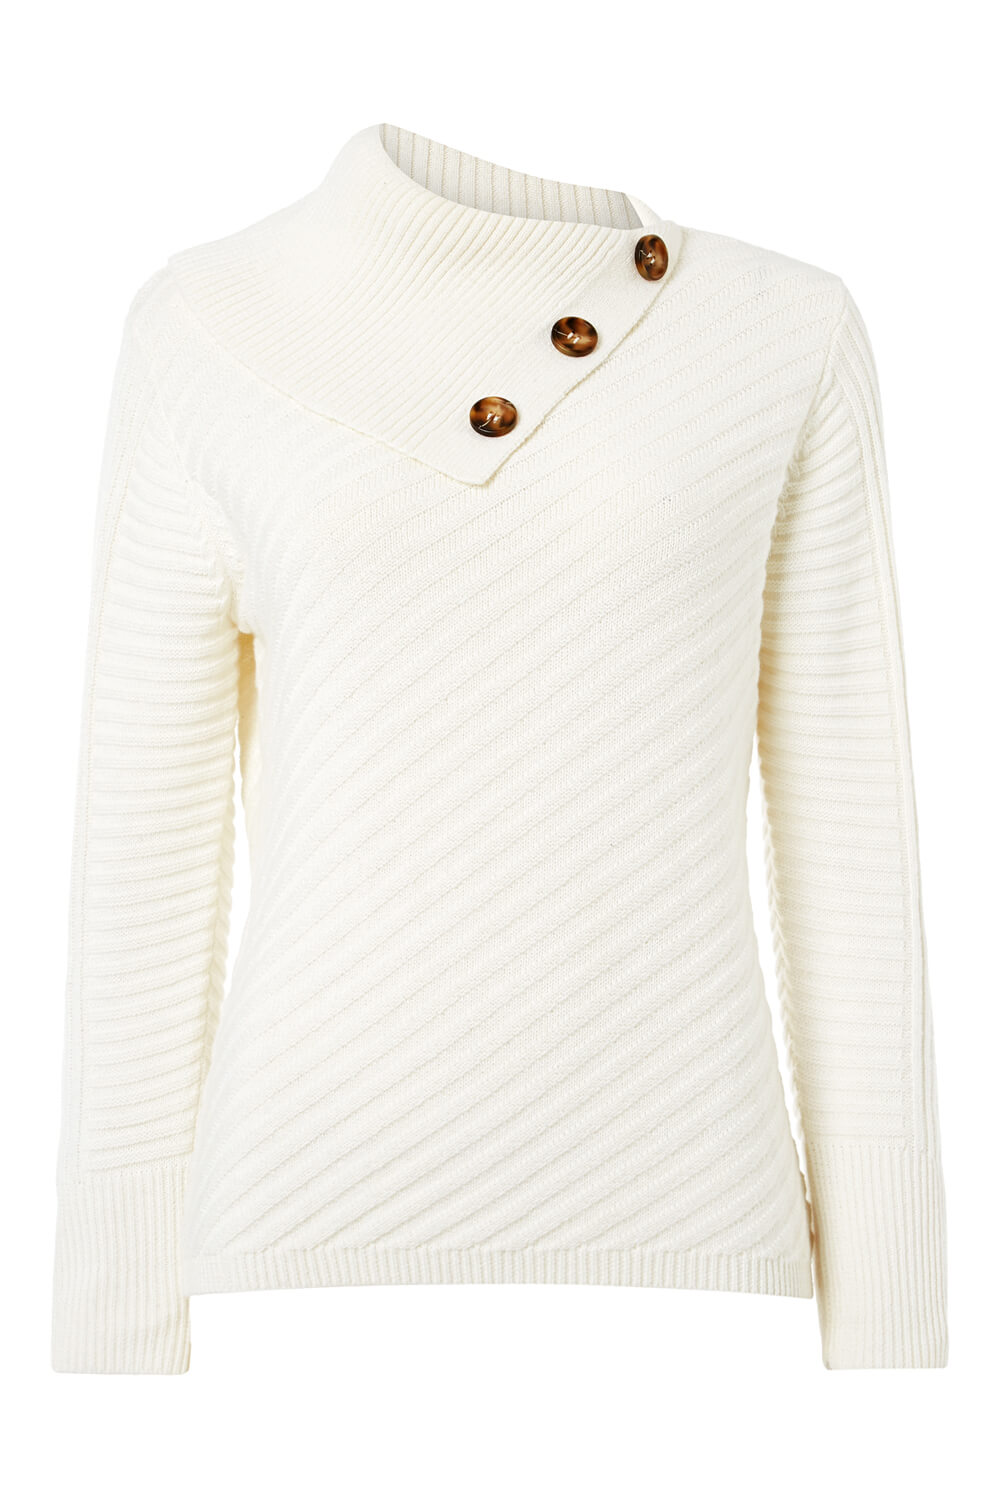 Ivory  Textured Knit Button Detail Jumper, Image 5 of 5